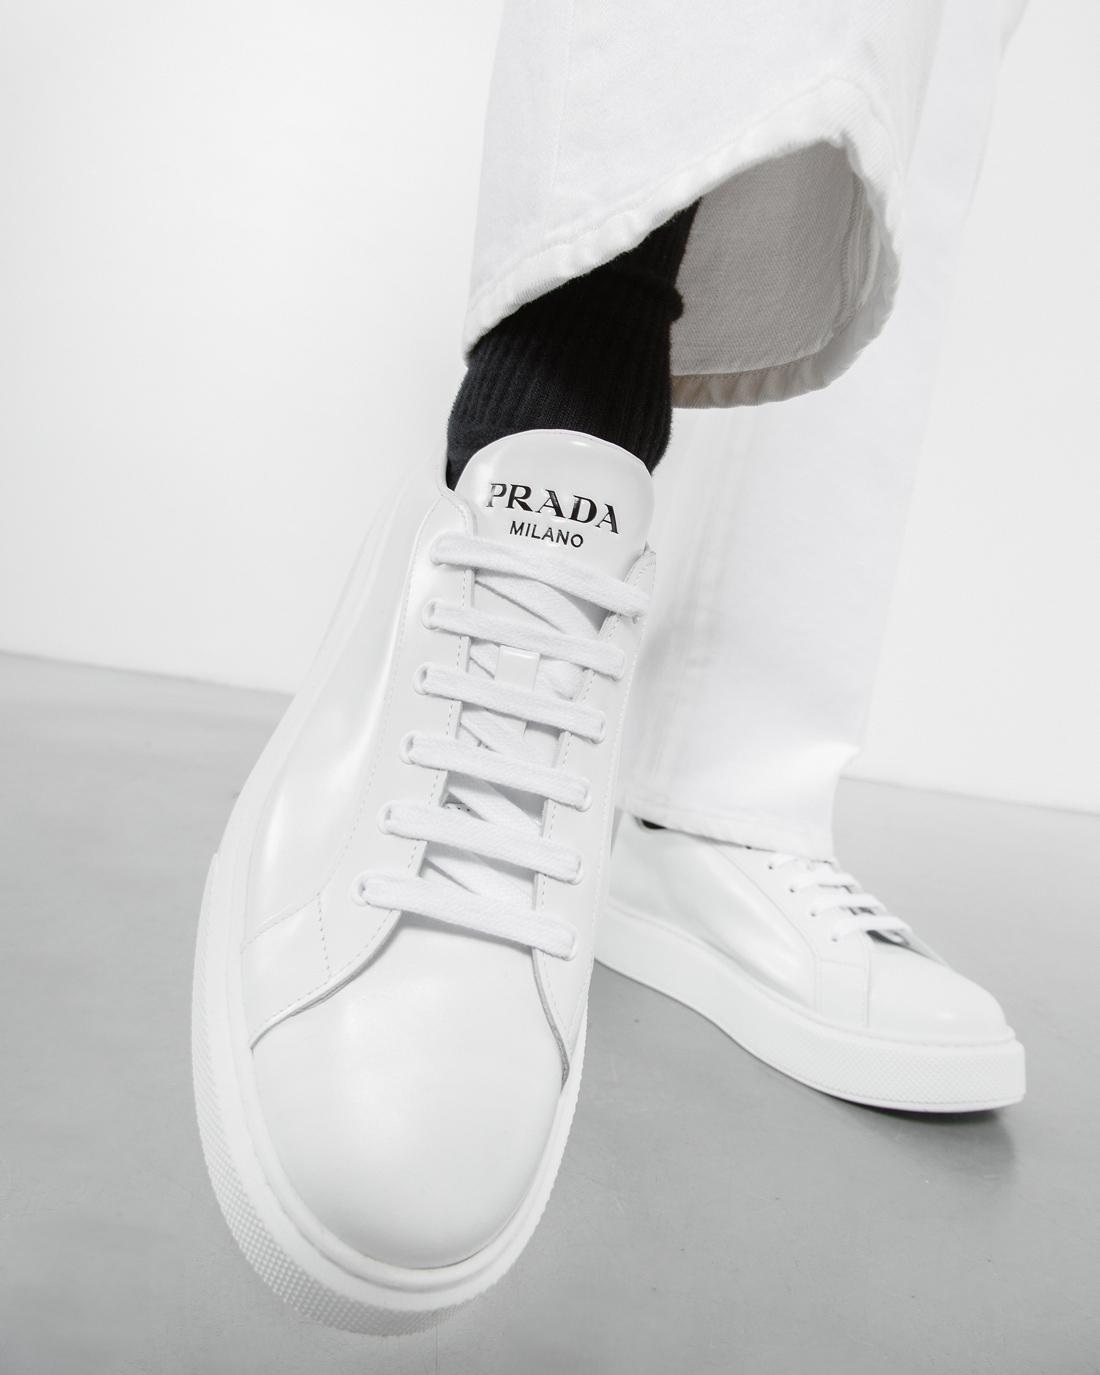 Men’s white sneakers, the models for spring summer 2020 | TheDoubleF